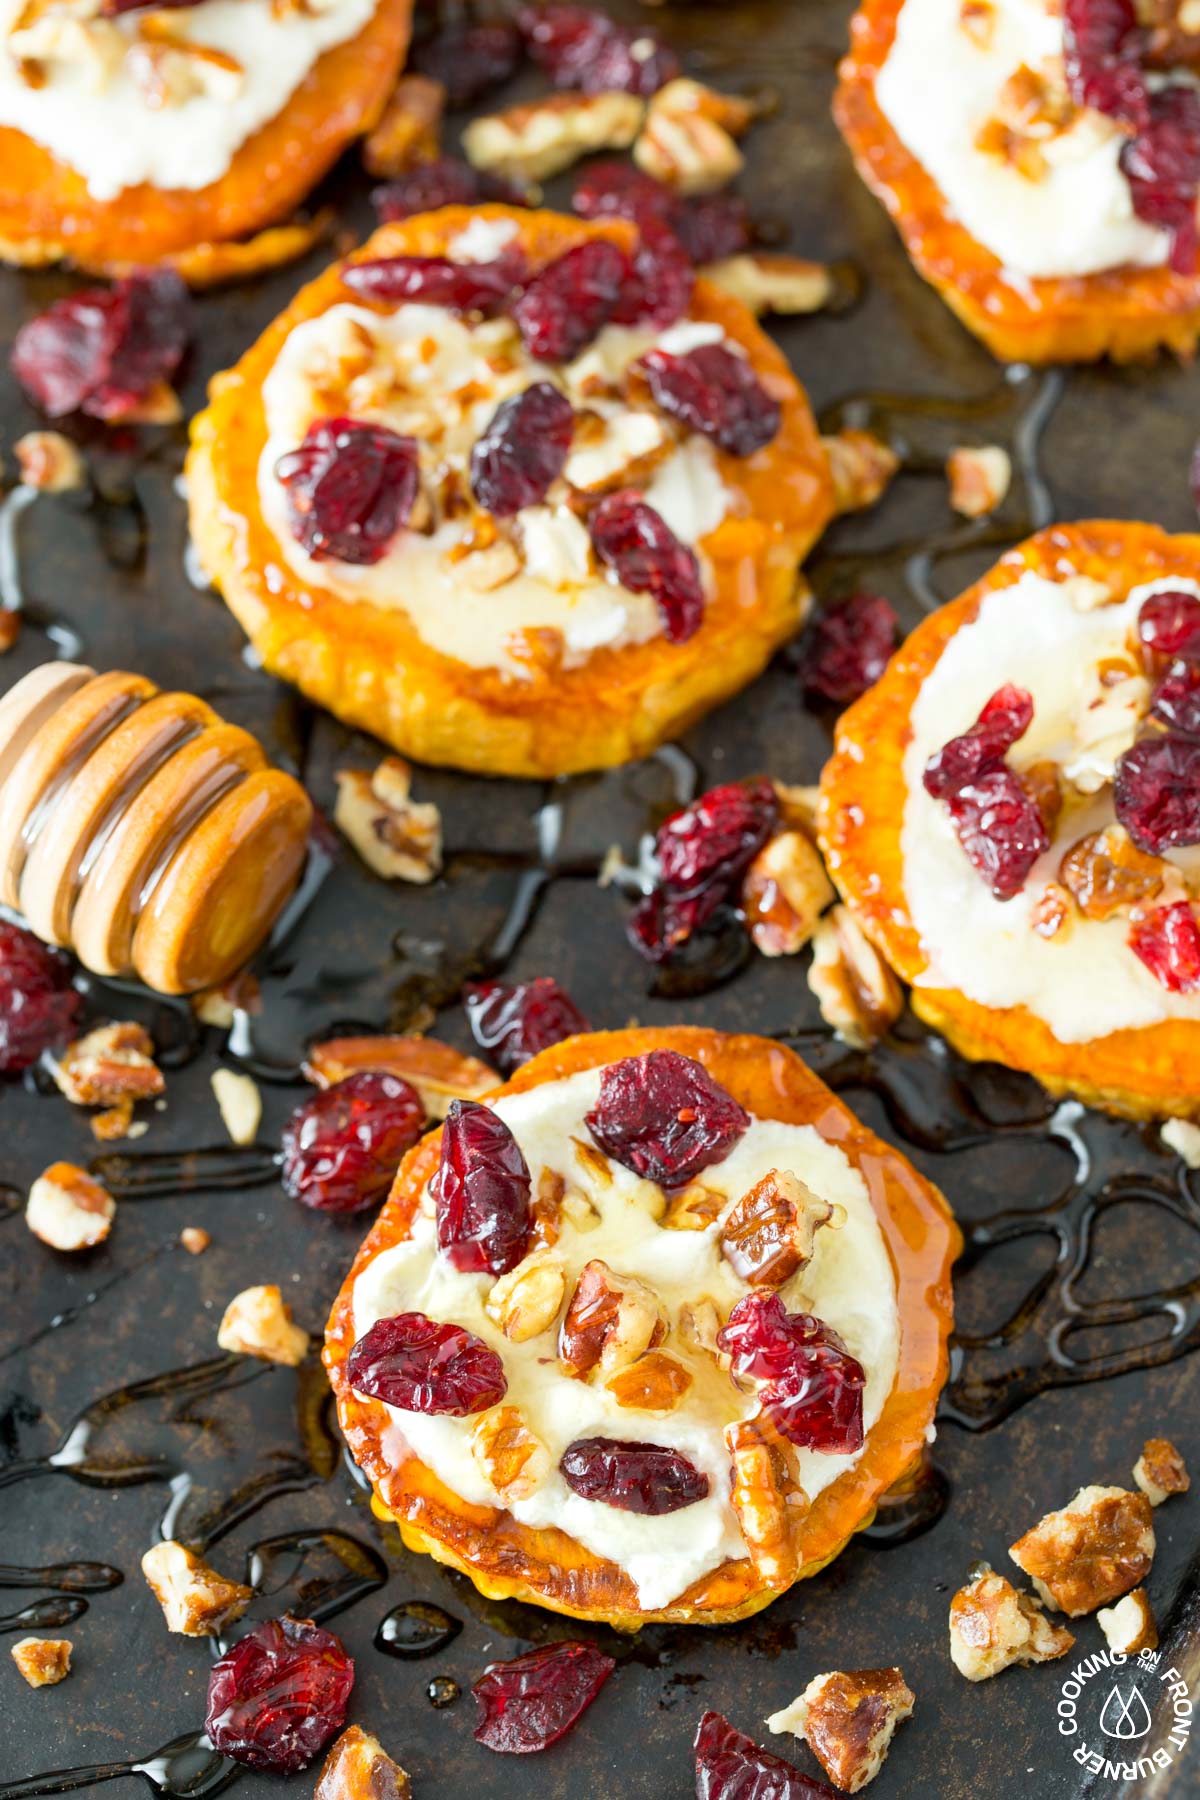 honey drizzled on sweet potato rounds